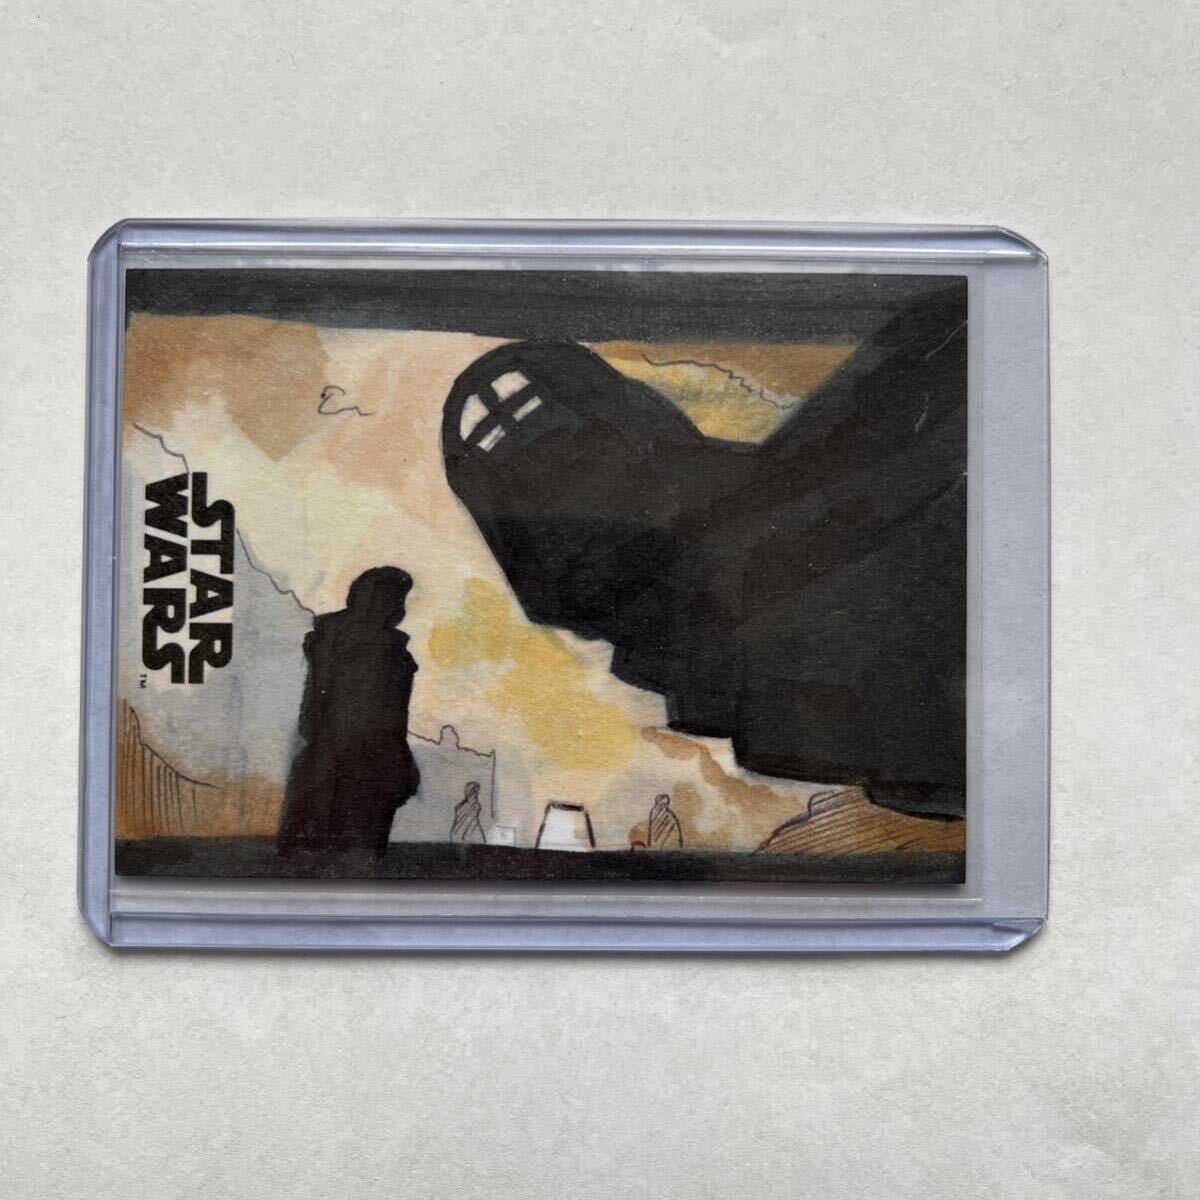 Topps Star Wars SOLO:A STAR WARS STORY スケッチカード 1/1 